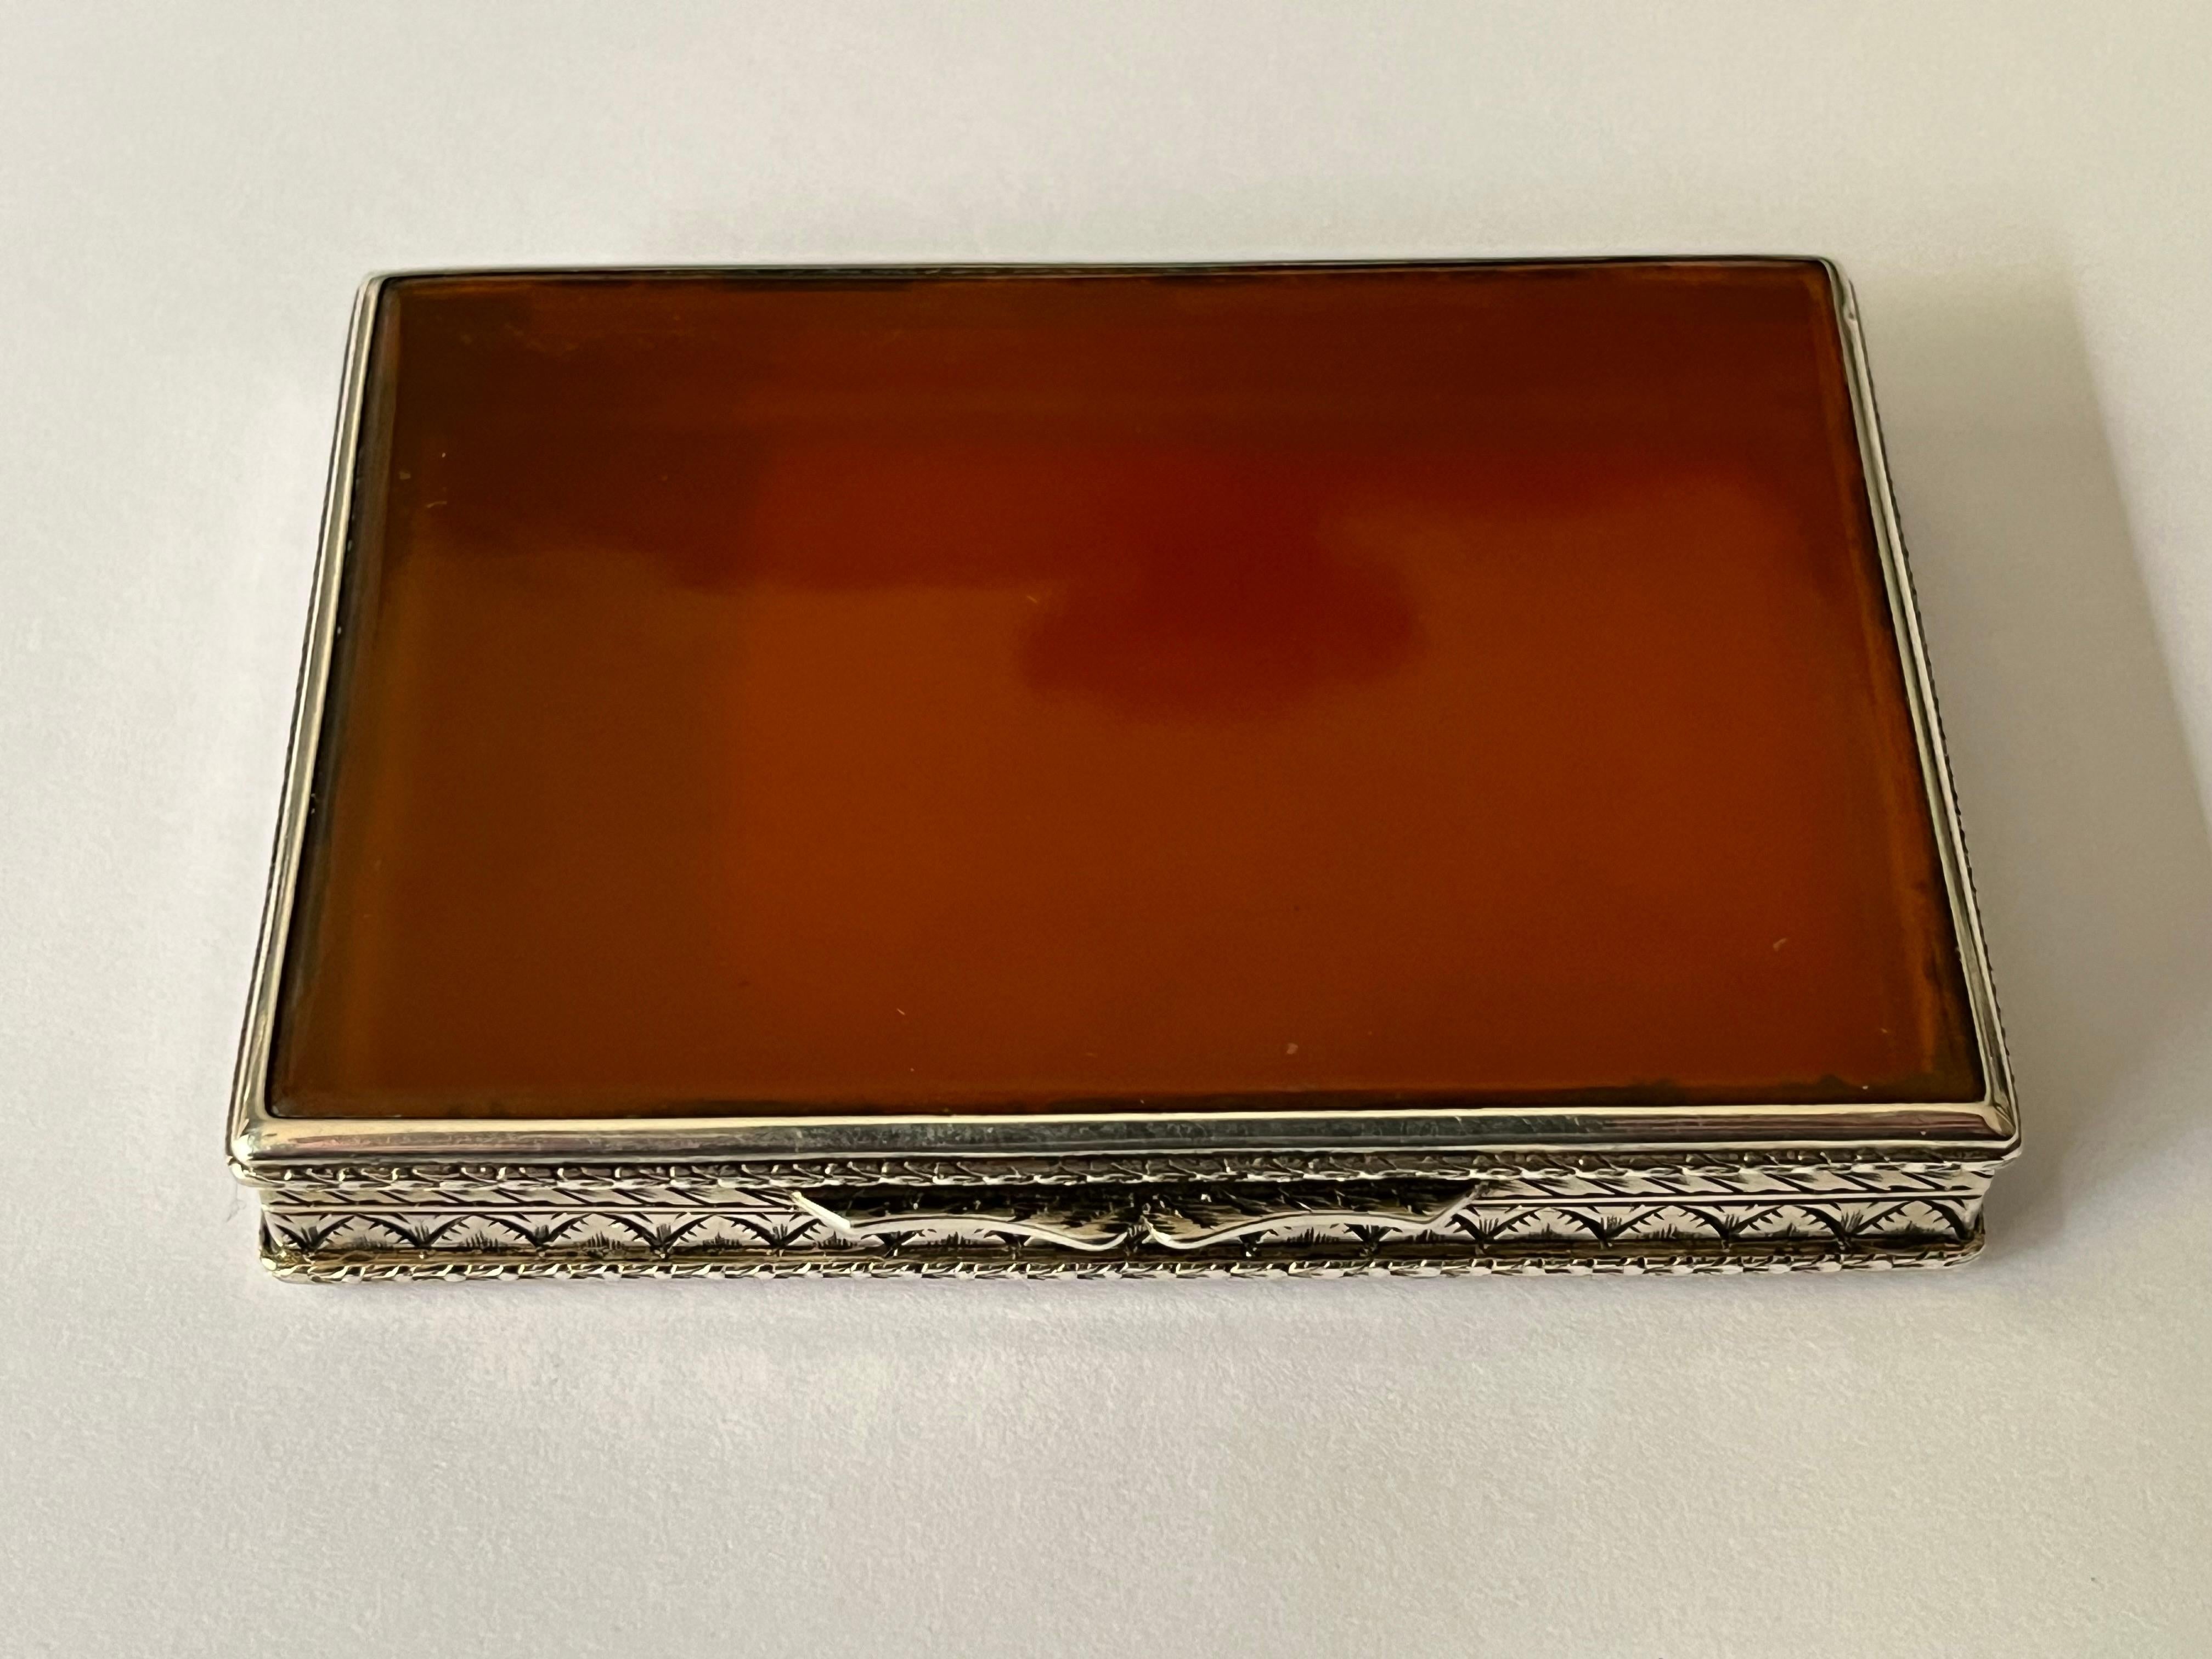 An early twentieth century Italian silver mounted blonde tortoiseshell box, the silver with intricate foliate decoration, the top and bottom cover inset with panels of blonde tortoiseshell. With twin scroll thumbpiece similarly embellished.

 

The